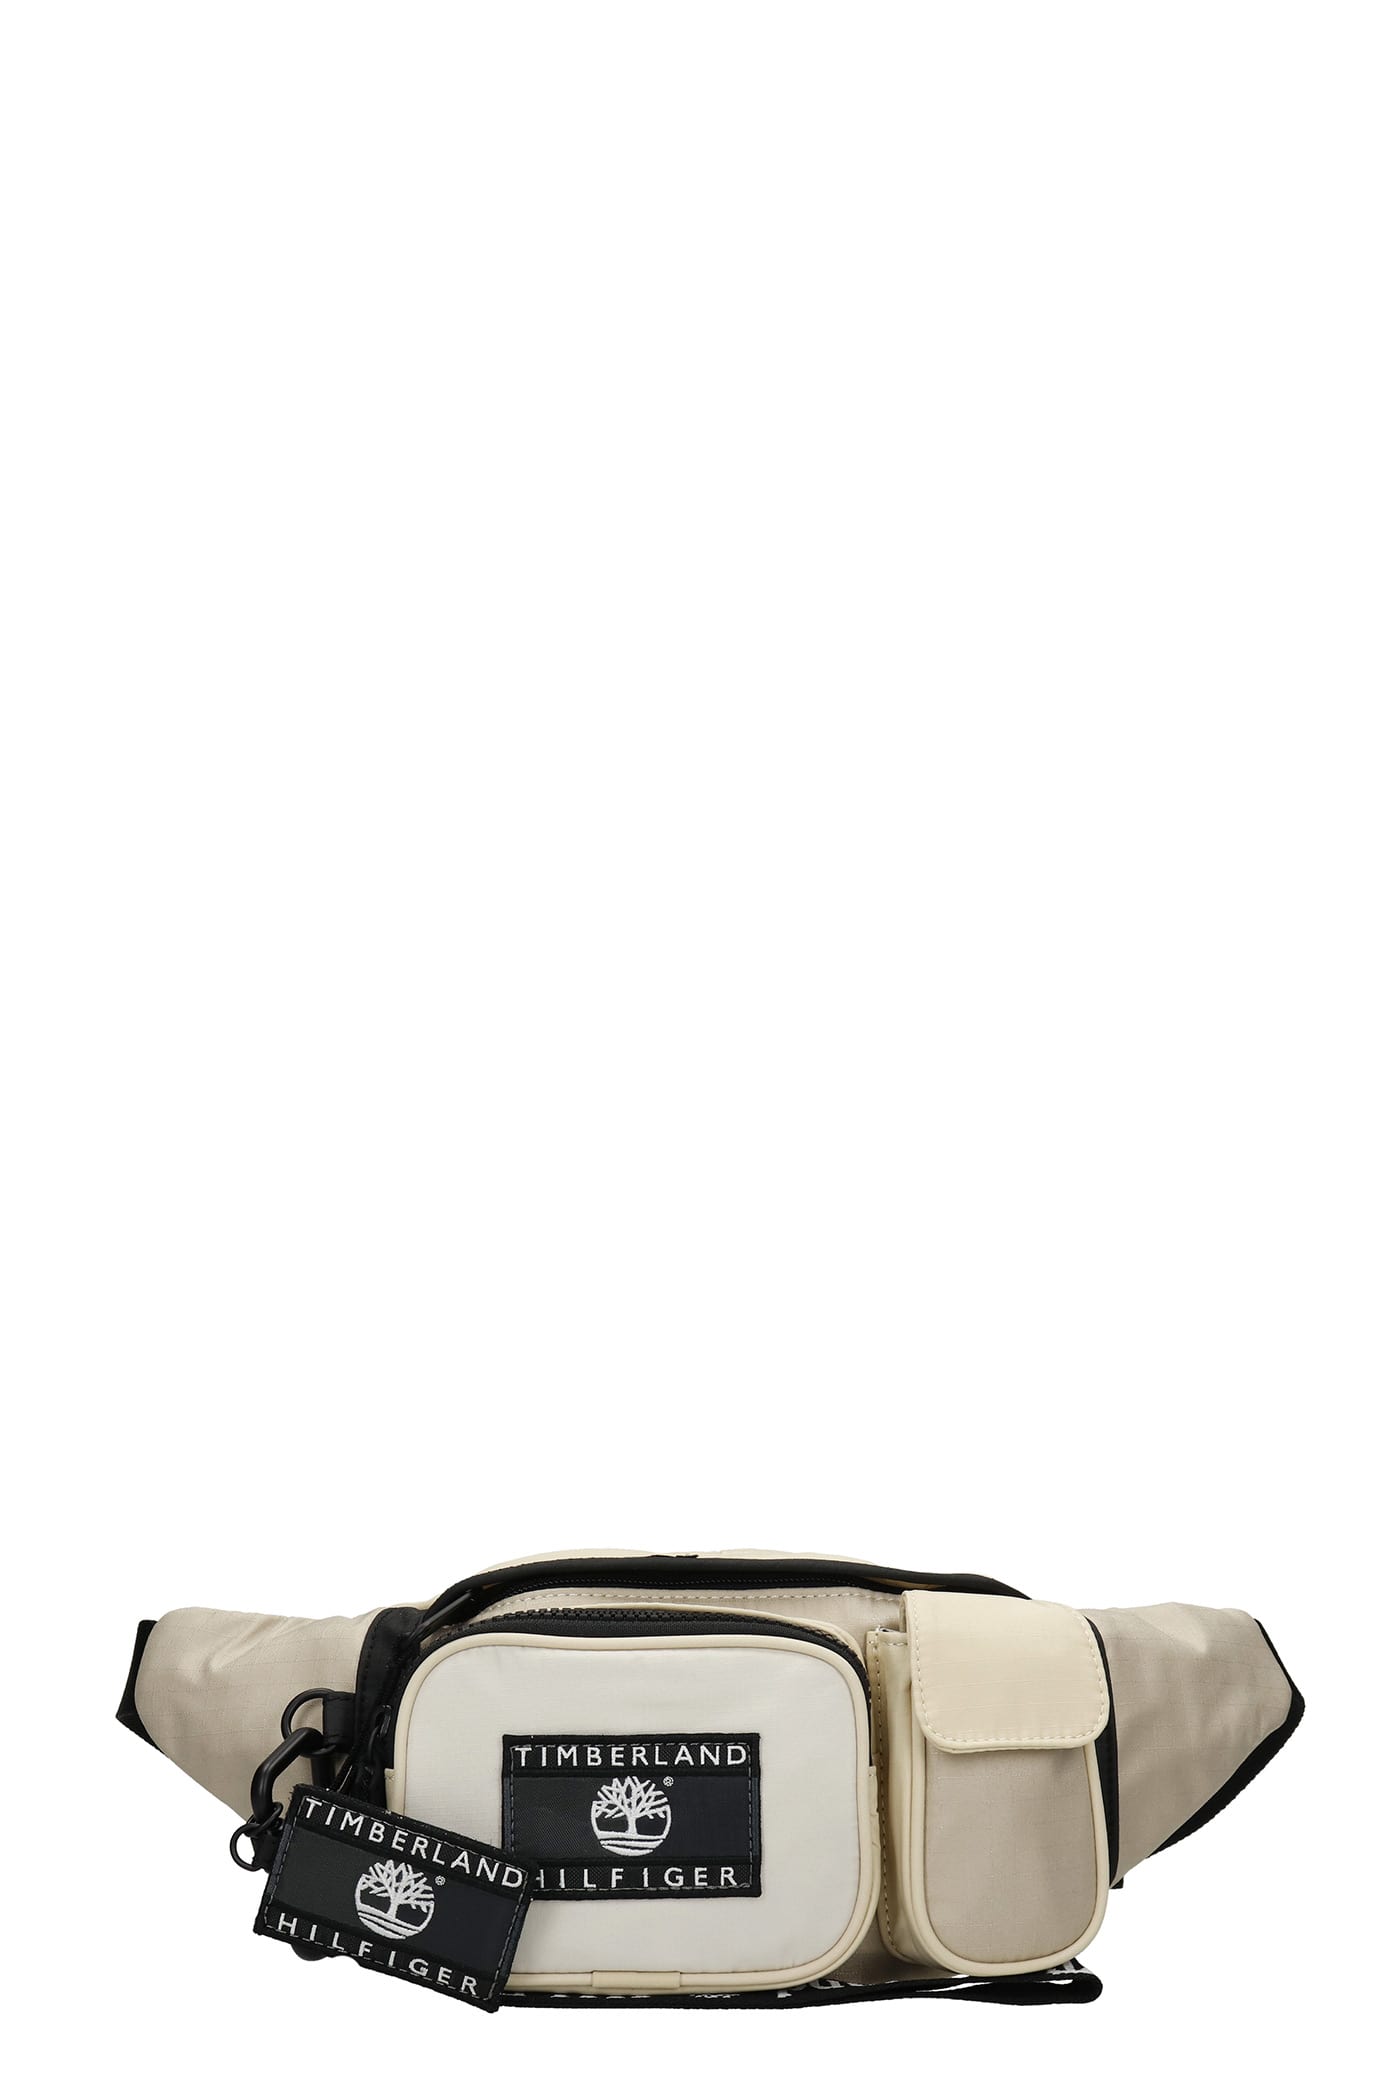 Timberland Waist Bag In White Synthetic Fibers